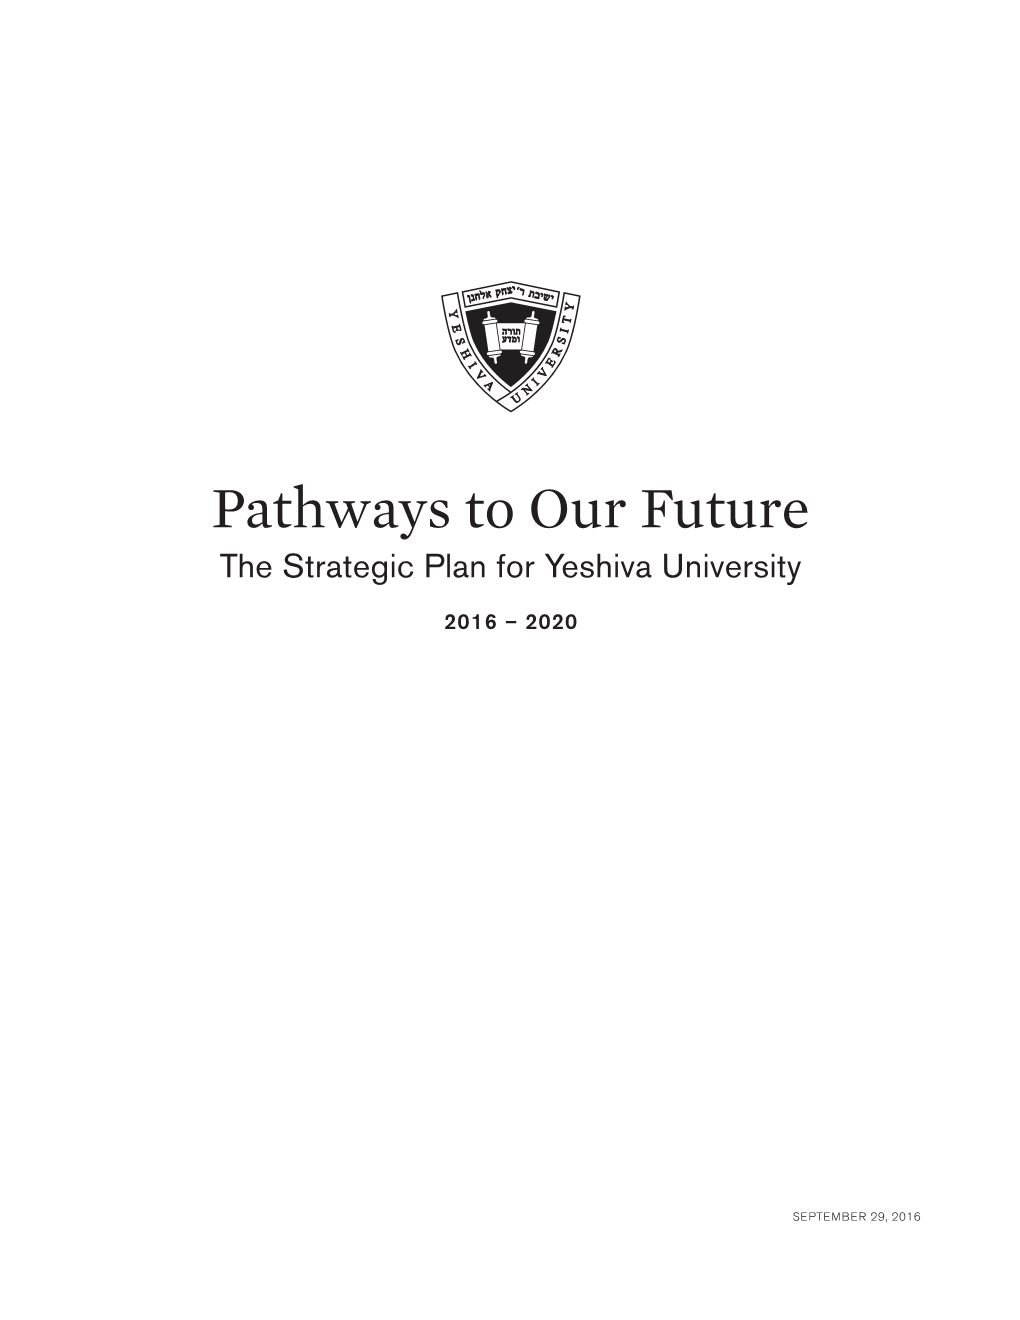 Pathways to Our Future the Strategic Plan for Yeshiva University